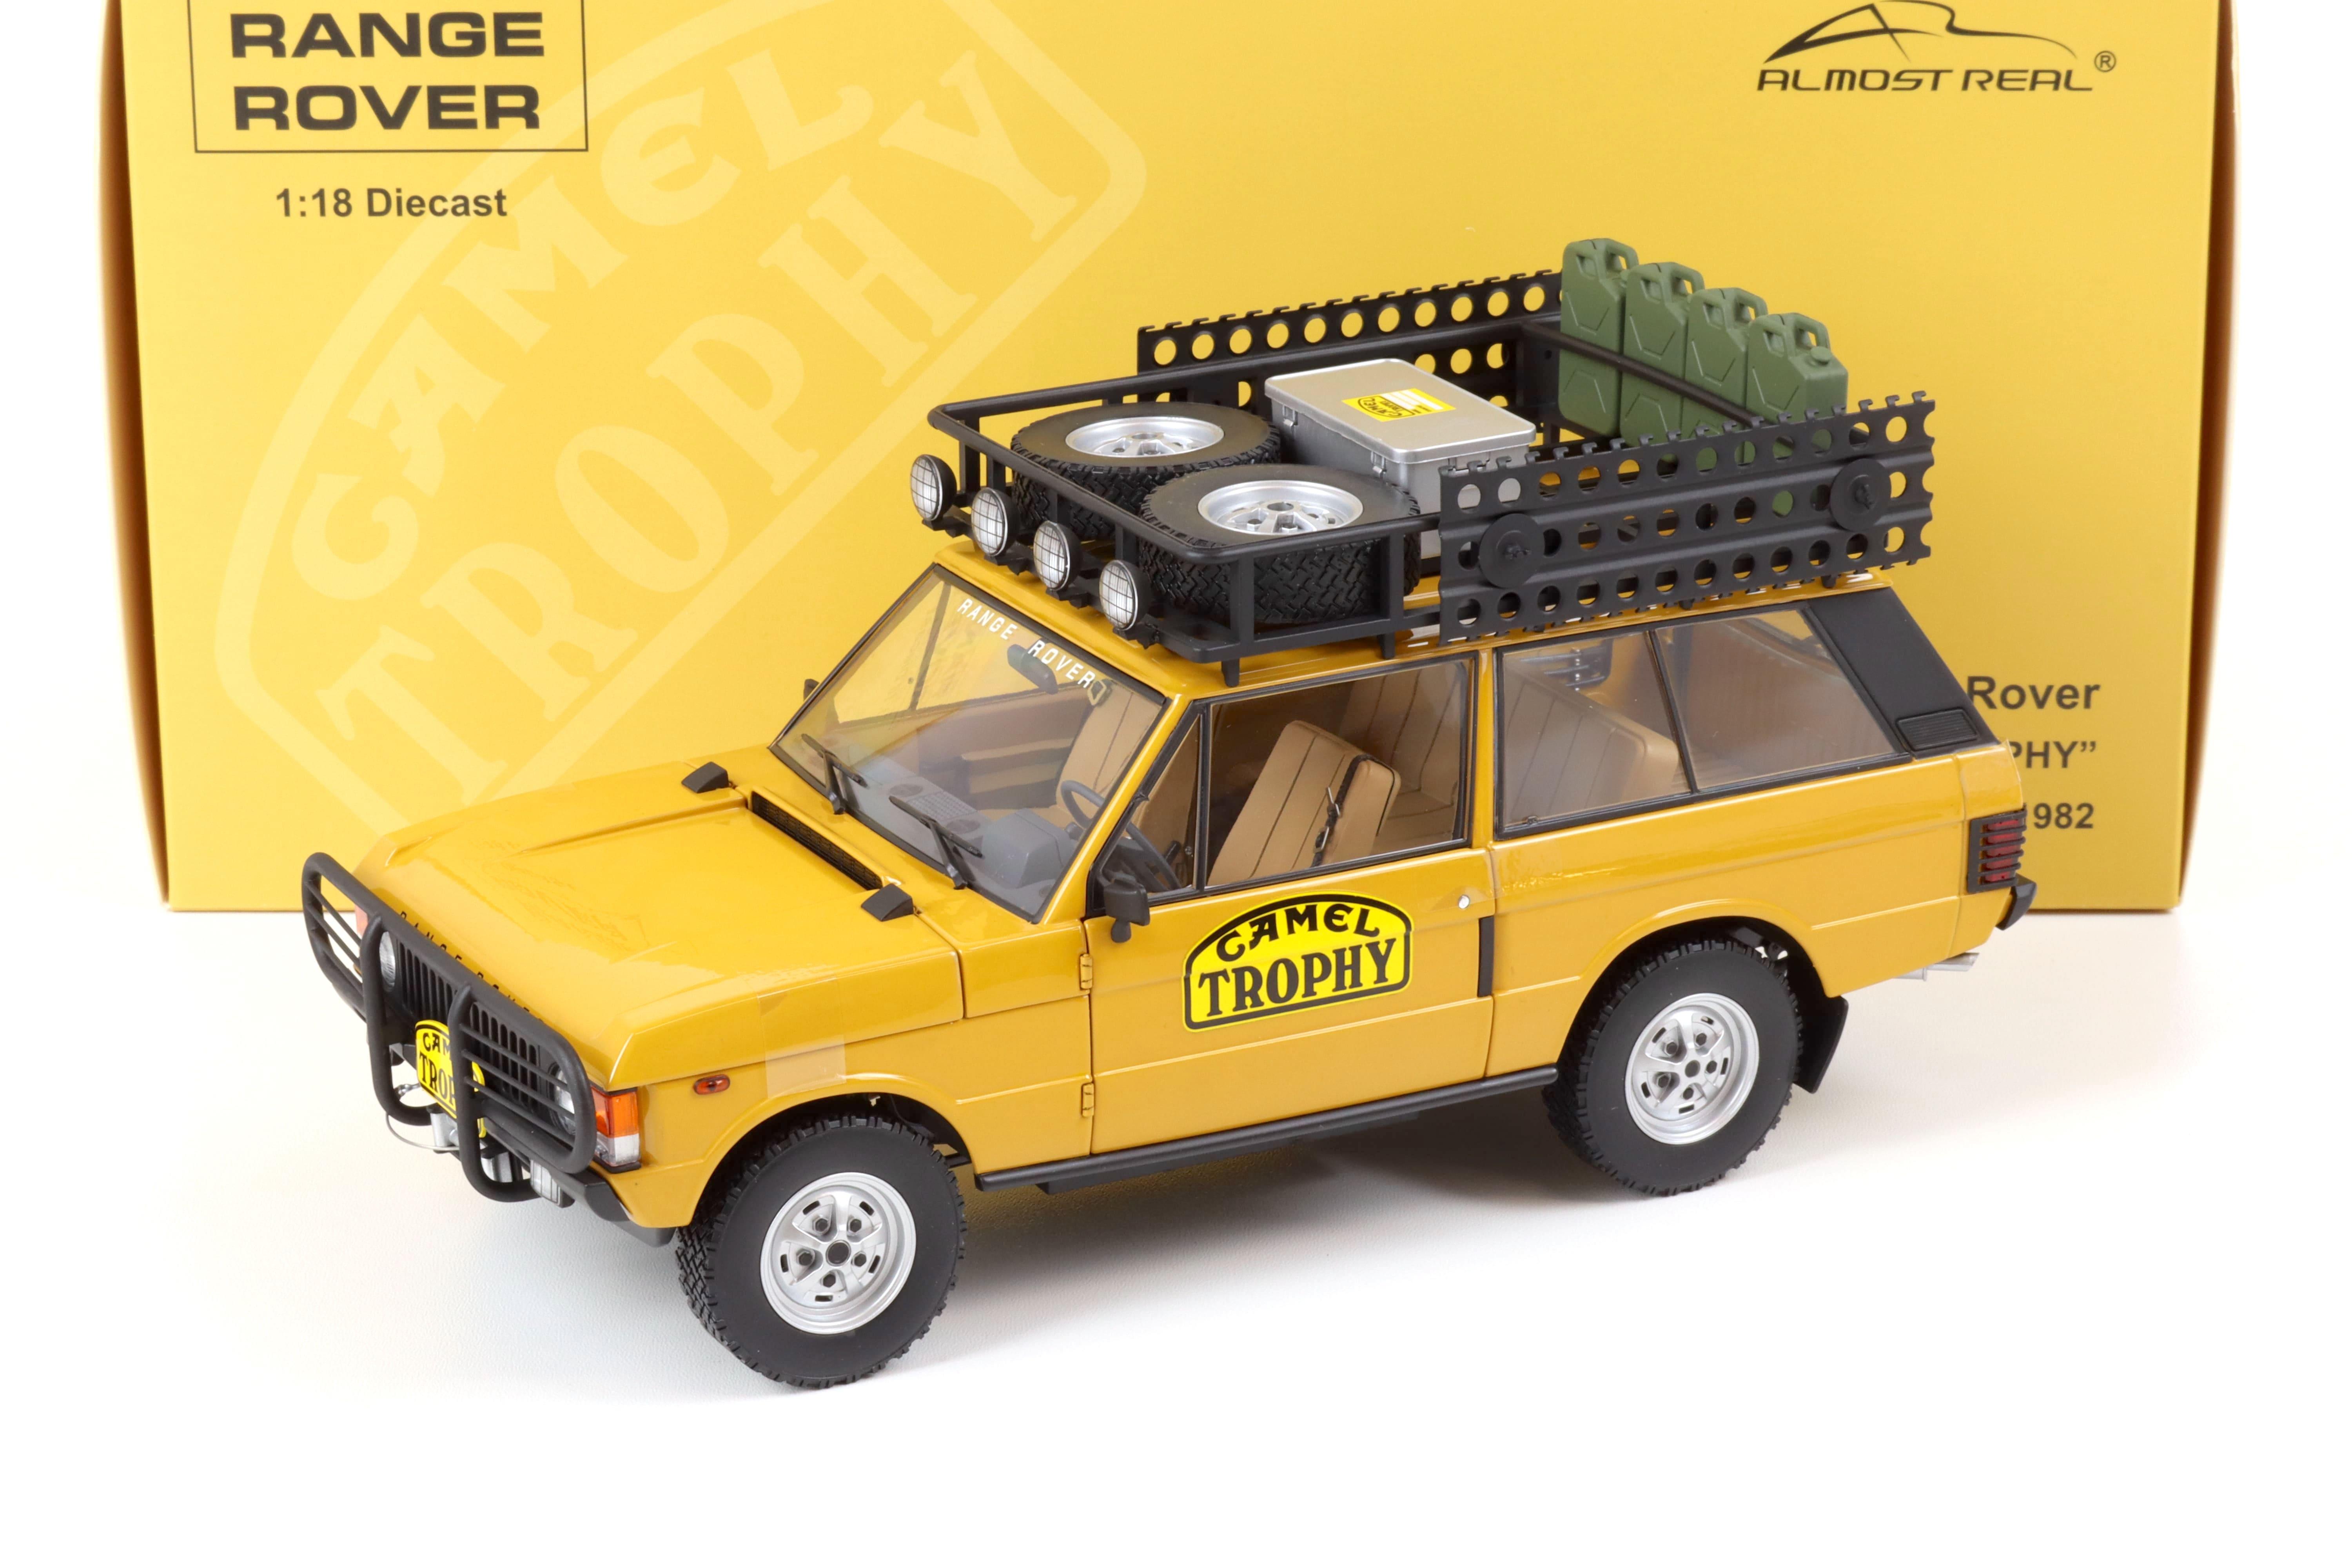 1:18 Almost Real Land Rover Range Rover "Camel Trophy" Papua New Guinea 1982